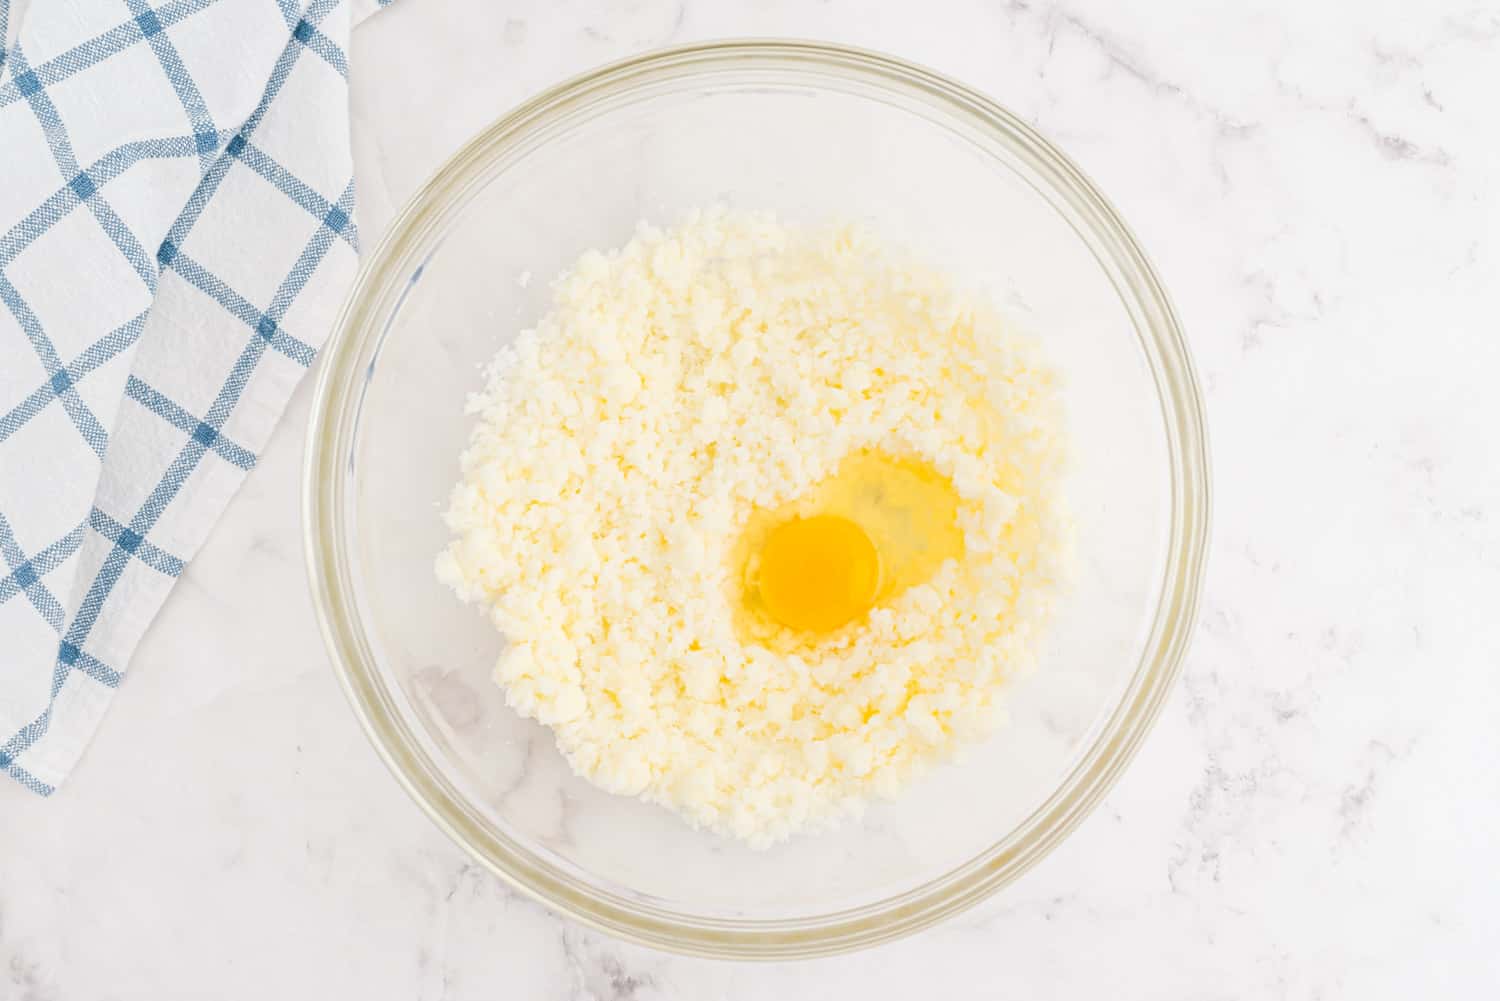 Butter, sugar, eggs, in a clear glass mixing bowl.